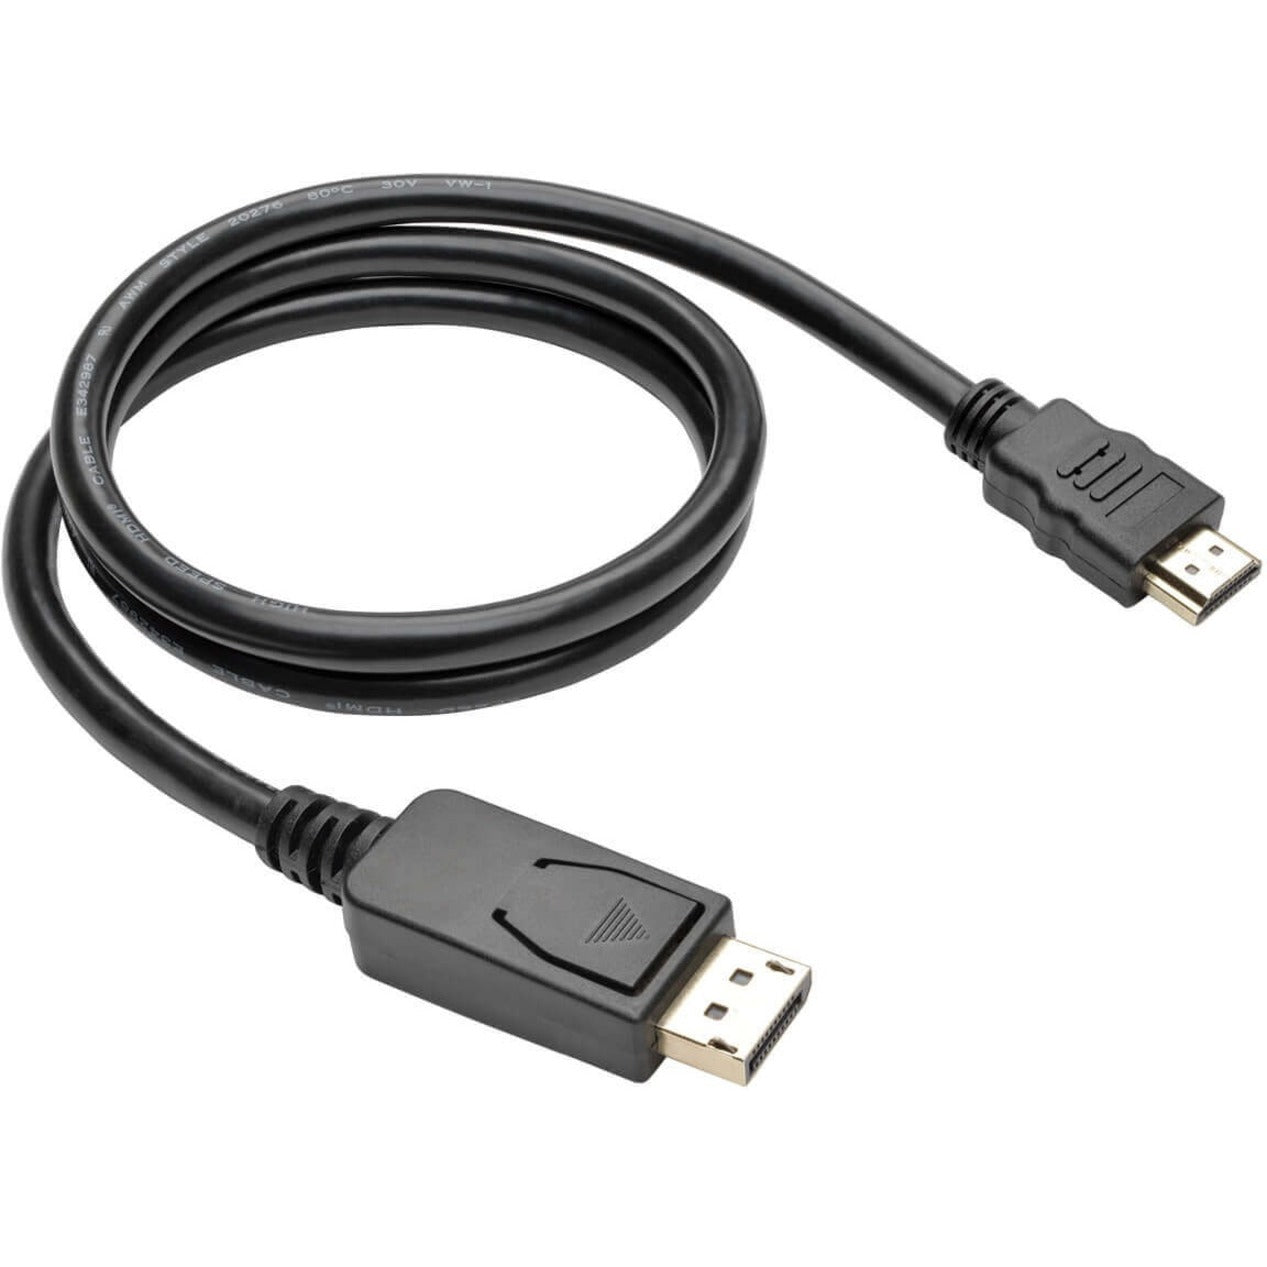 Tripp Lite P582-003-V2 DisplayPort 1.2 to HDMI Adapter Cable, 3 ft. UHD-Compatible